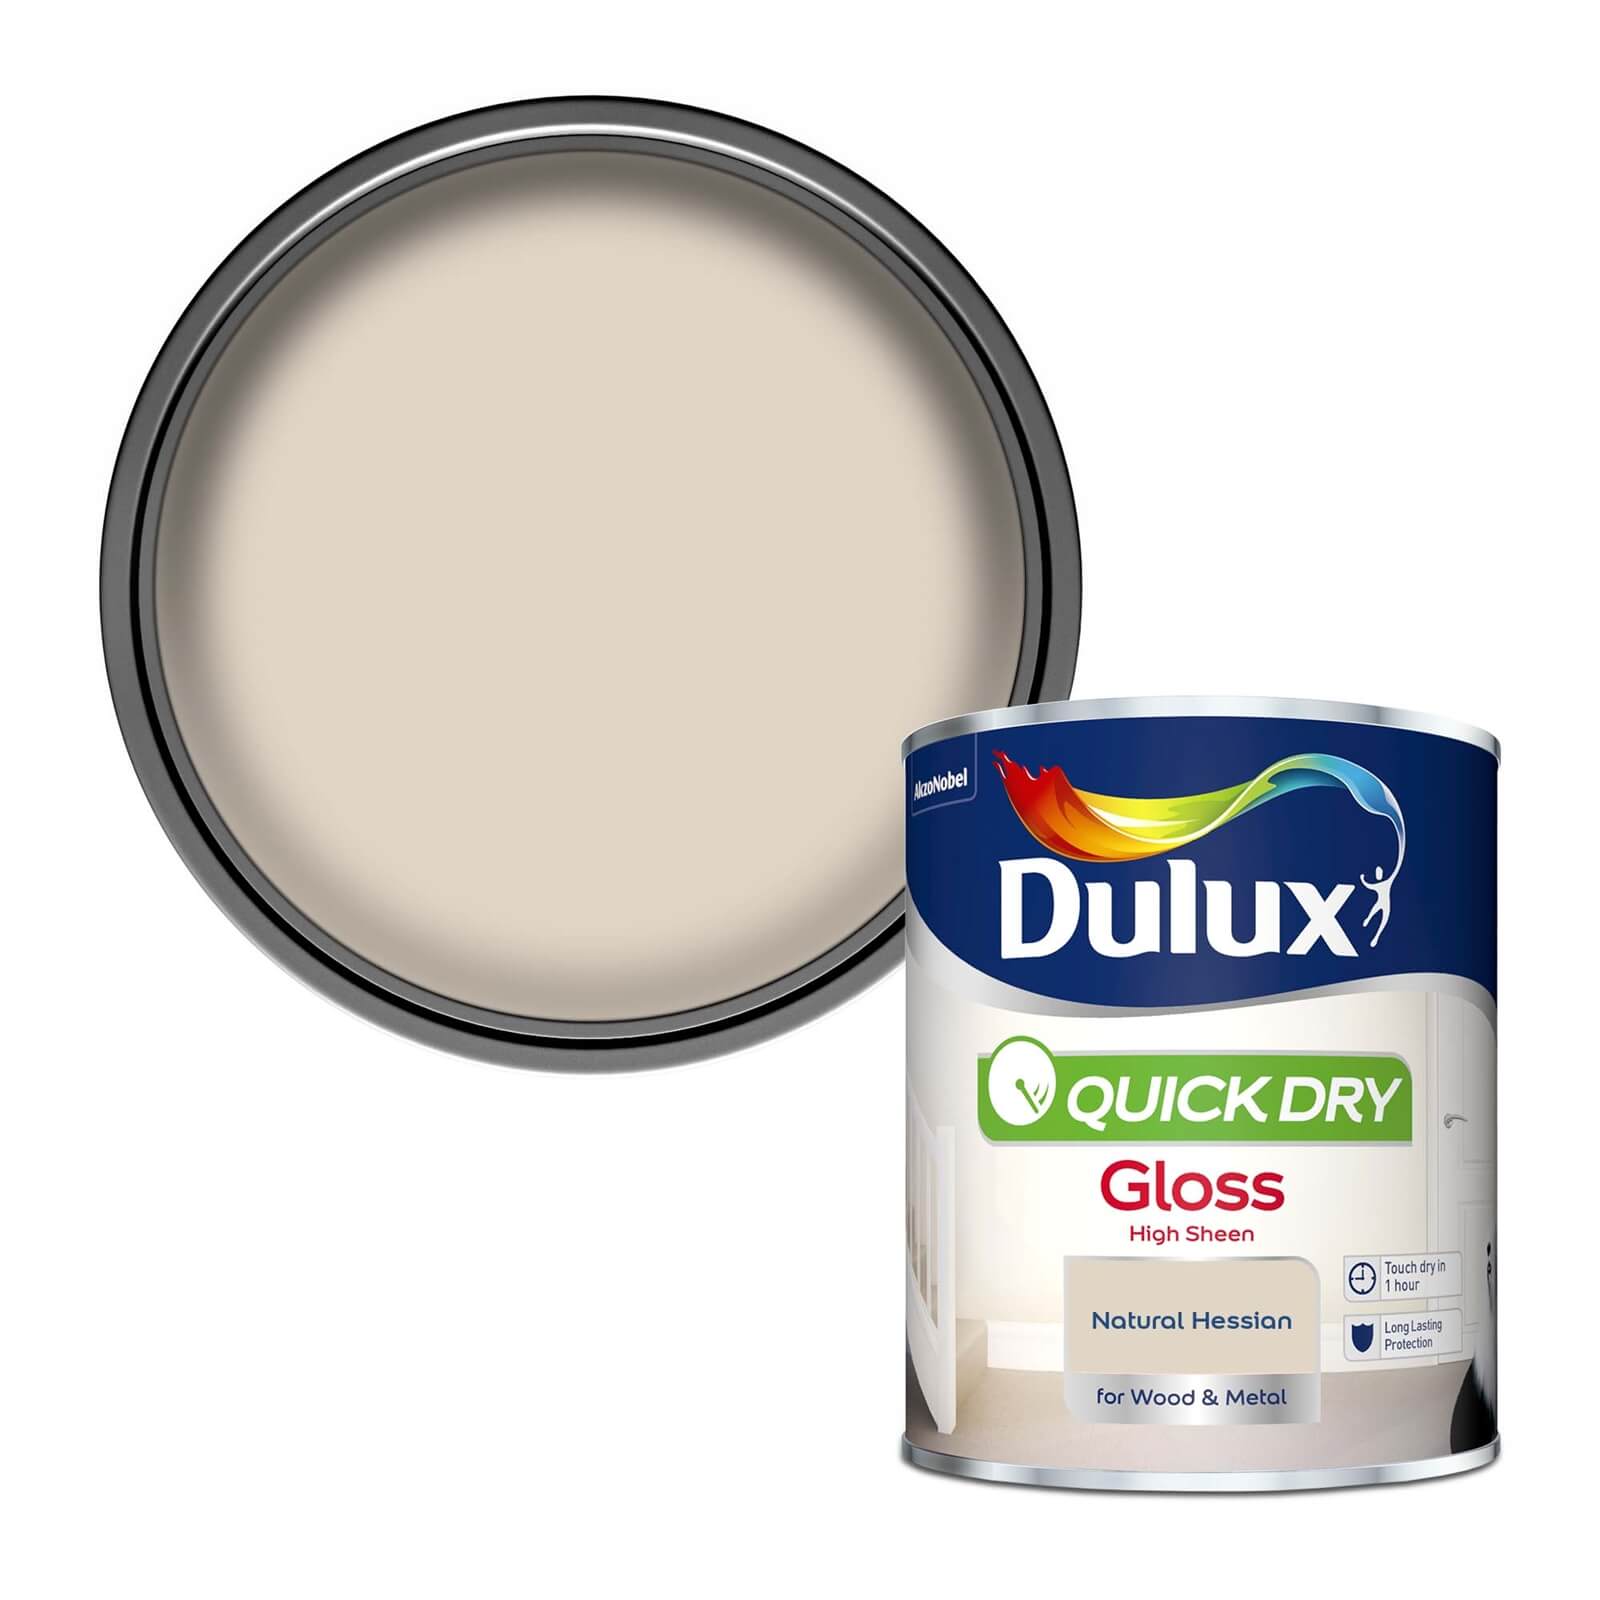 Dulux Quick Dry Gloss Natural Hessian - 750ml